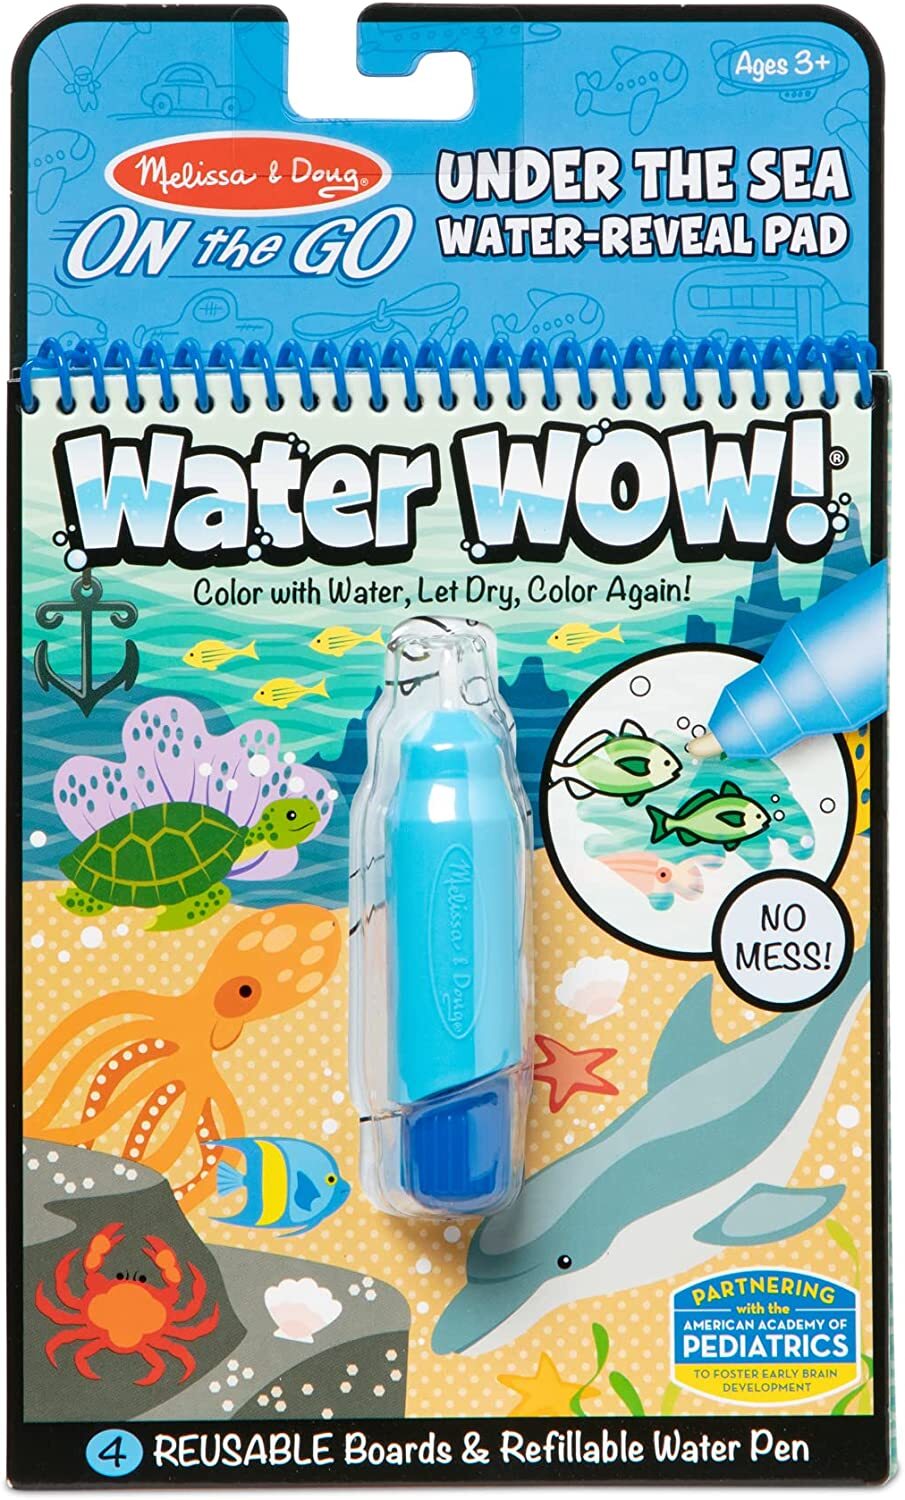 M&D 9445 On The Go Water WOW Under The Sea